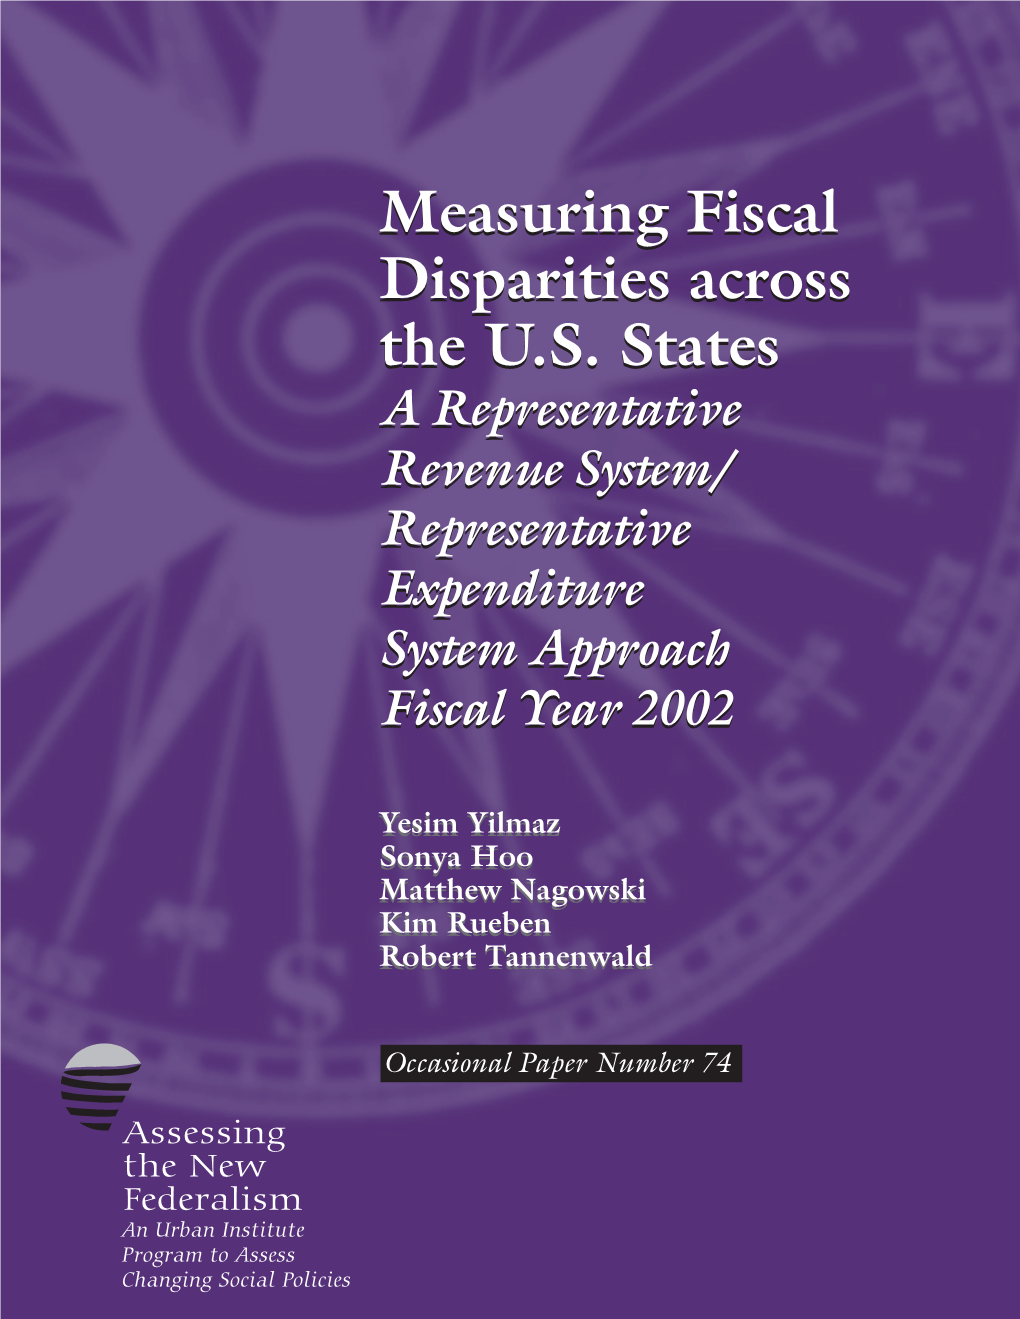 Measuring Fiscal Disparities Across the U.S. States a Representative Revenue System/ Representative Expenditure System Approach Fiscal Year 2002